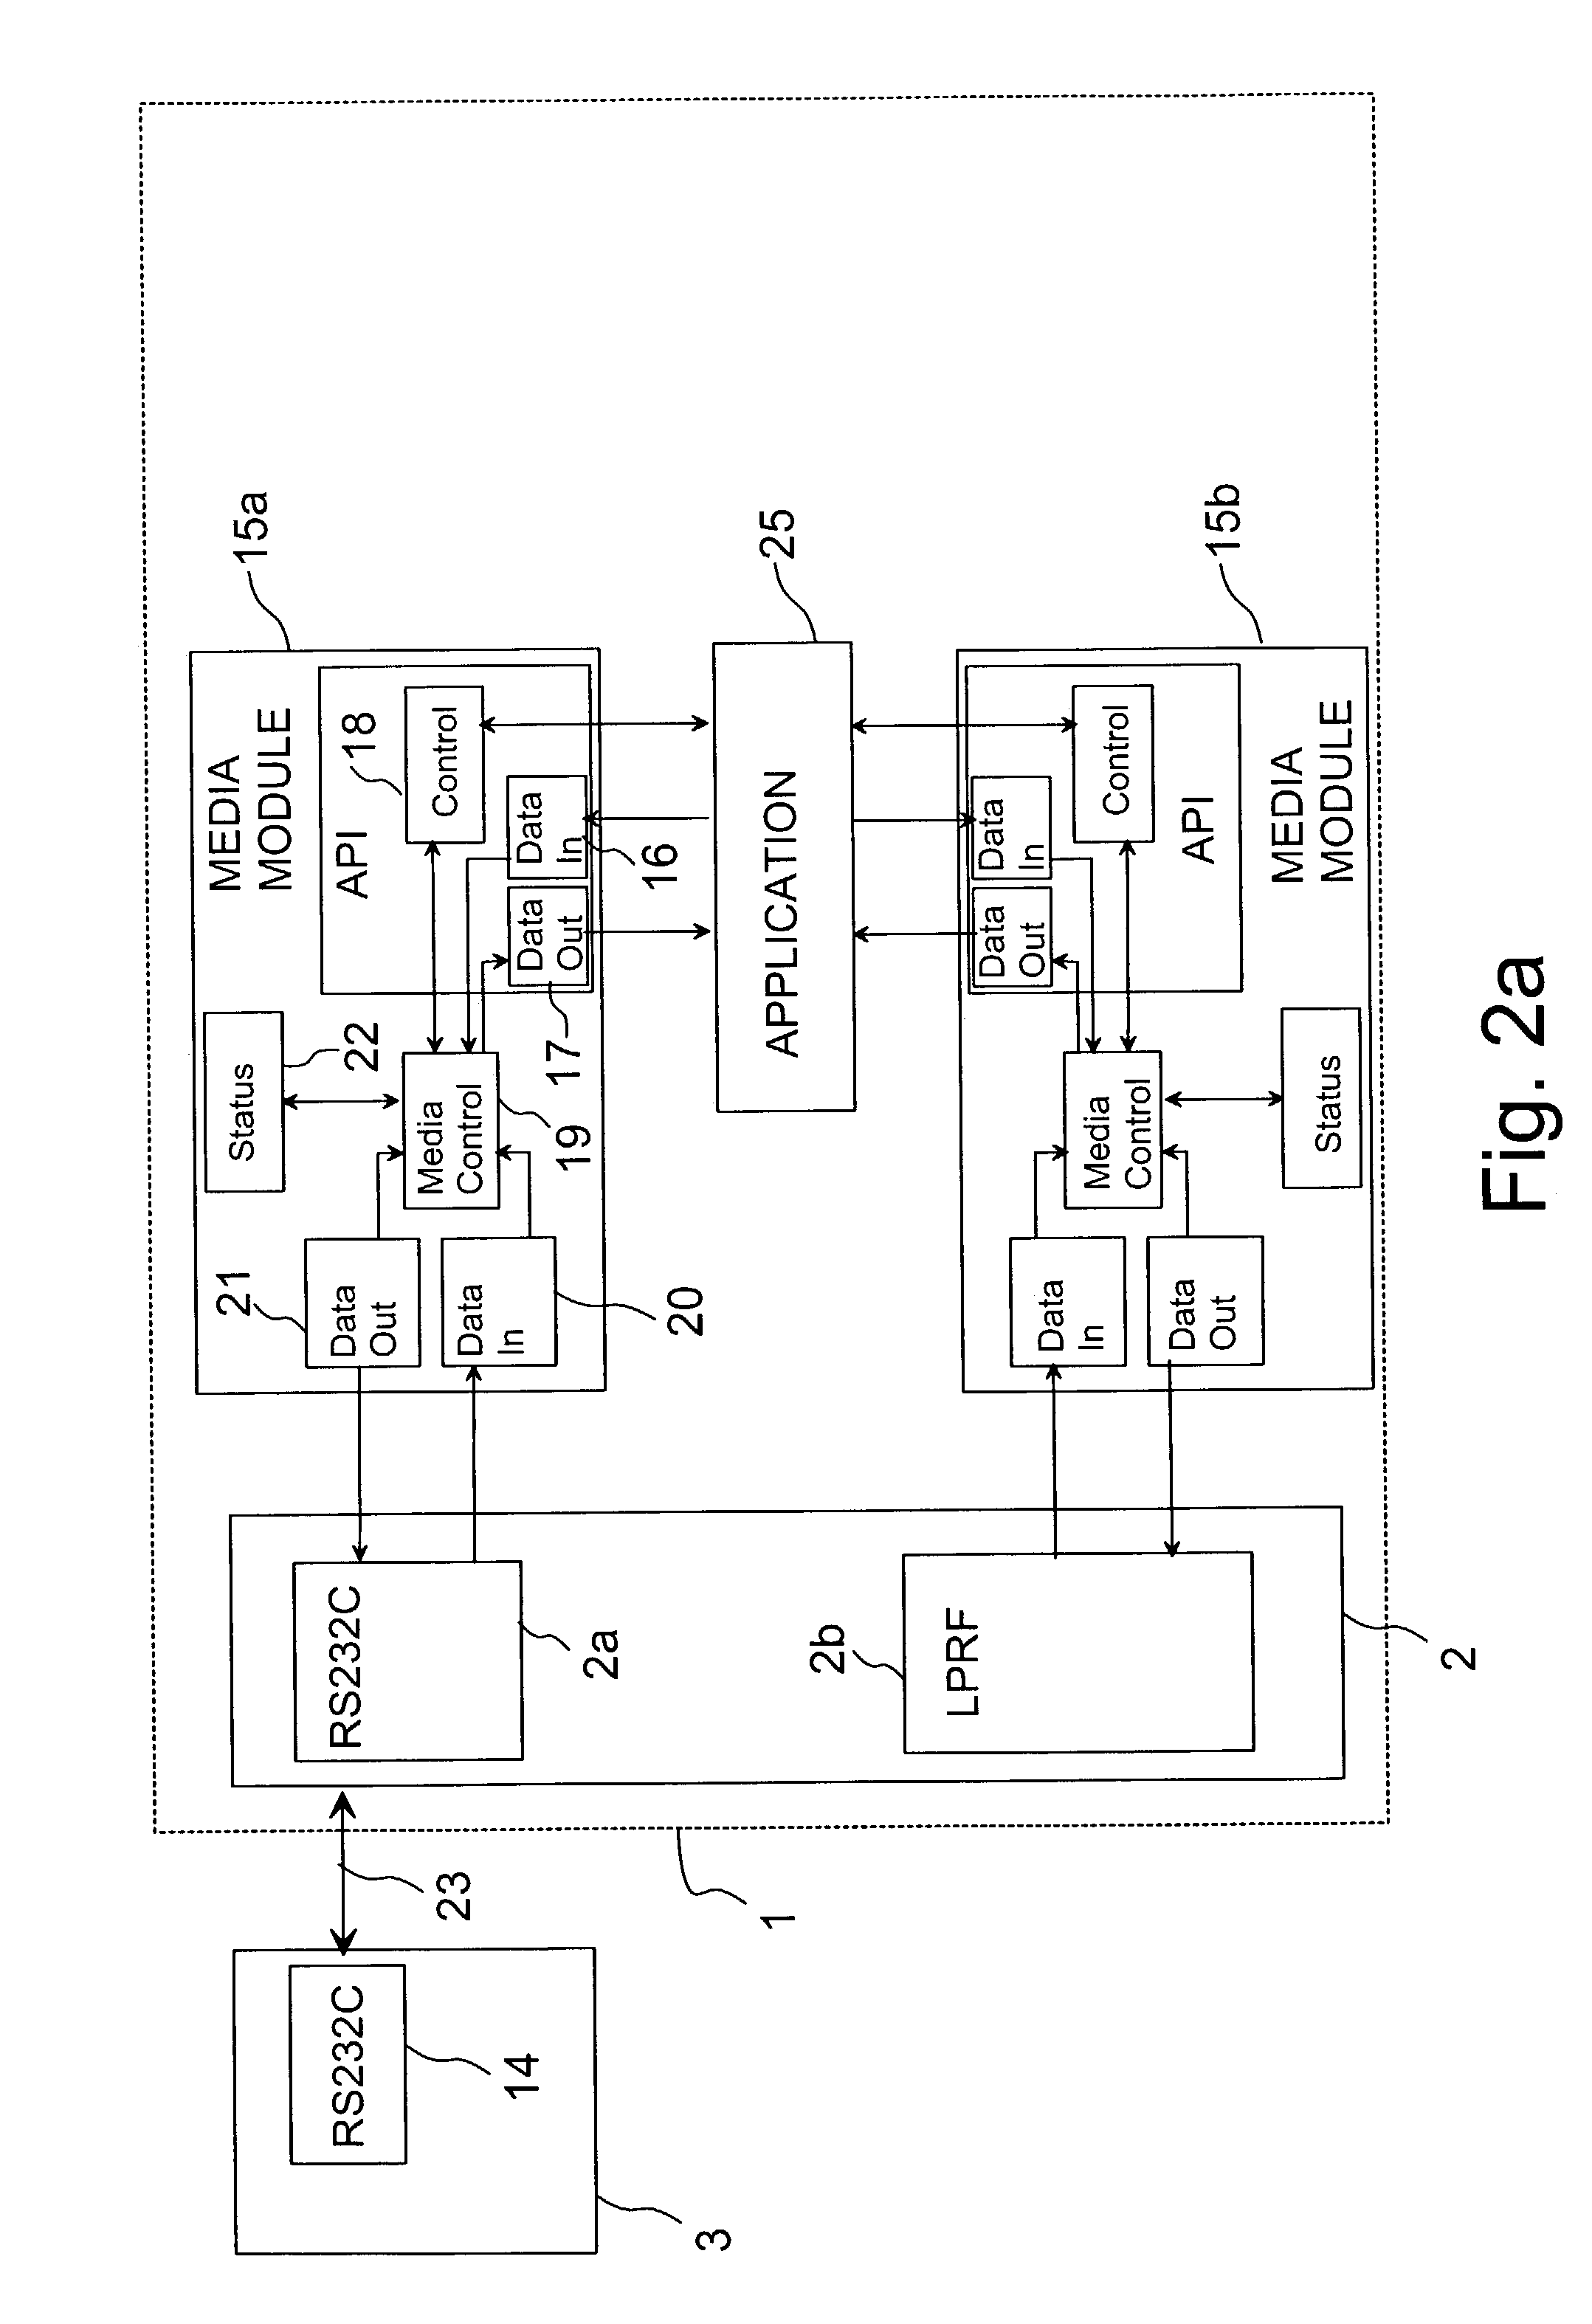 Method for providing connections on a portable device, a portable device